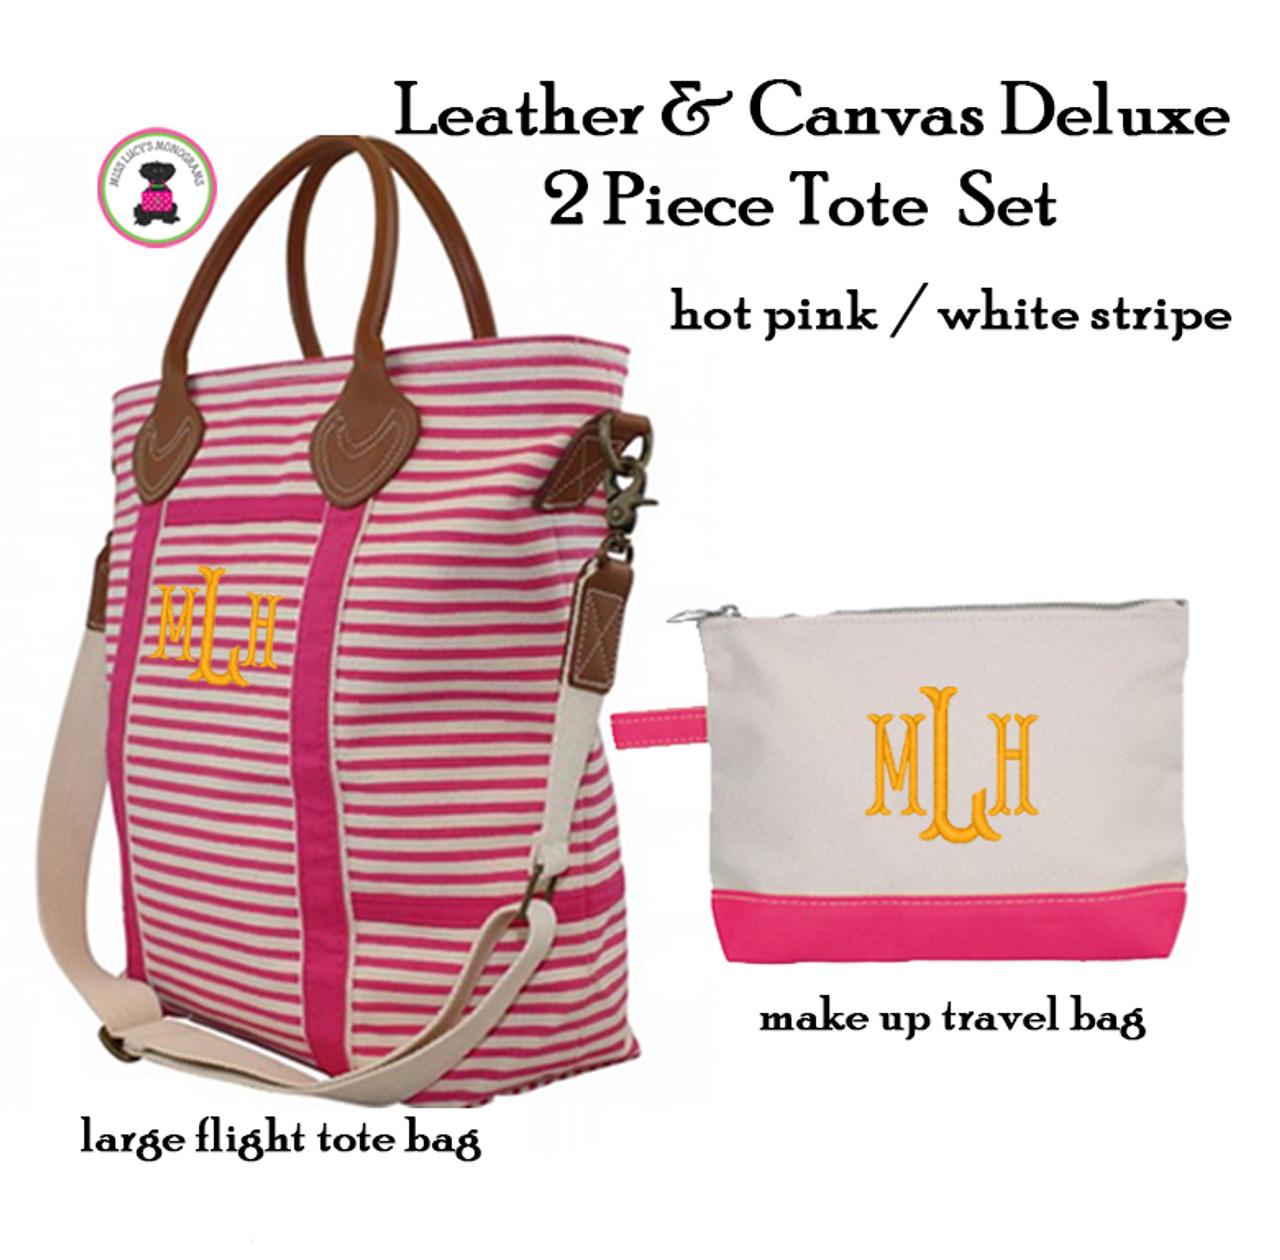 FOR HER Monogrammed Canvas & Leather 2 Piece Travel Tote Set- Hot Pink /  White Stripe - FREE SHIP/Engagement Gift/Bride and Groom Gift /Bridal  Shower Gift/Just Married/ New Couple Gift/Honeymoon Gift